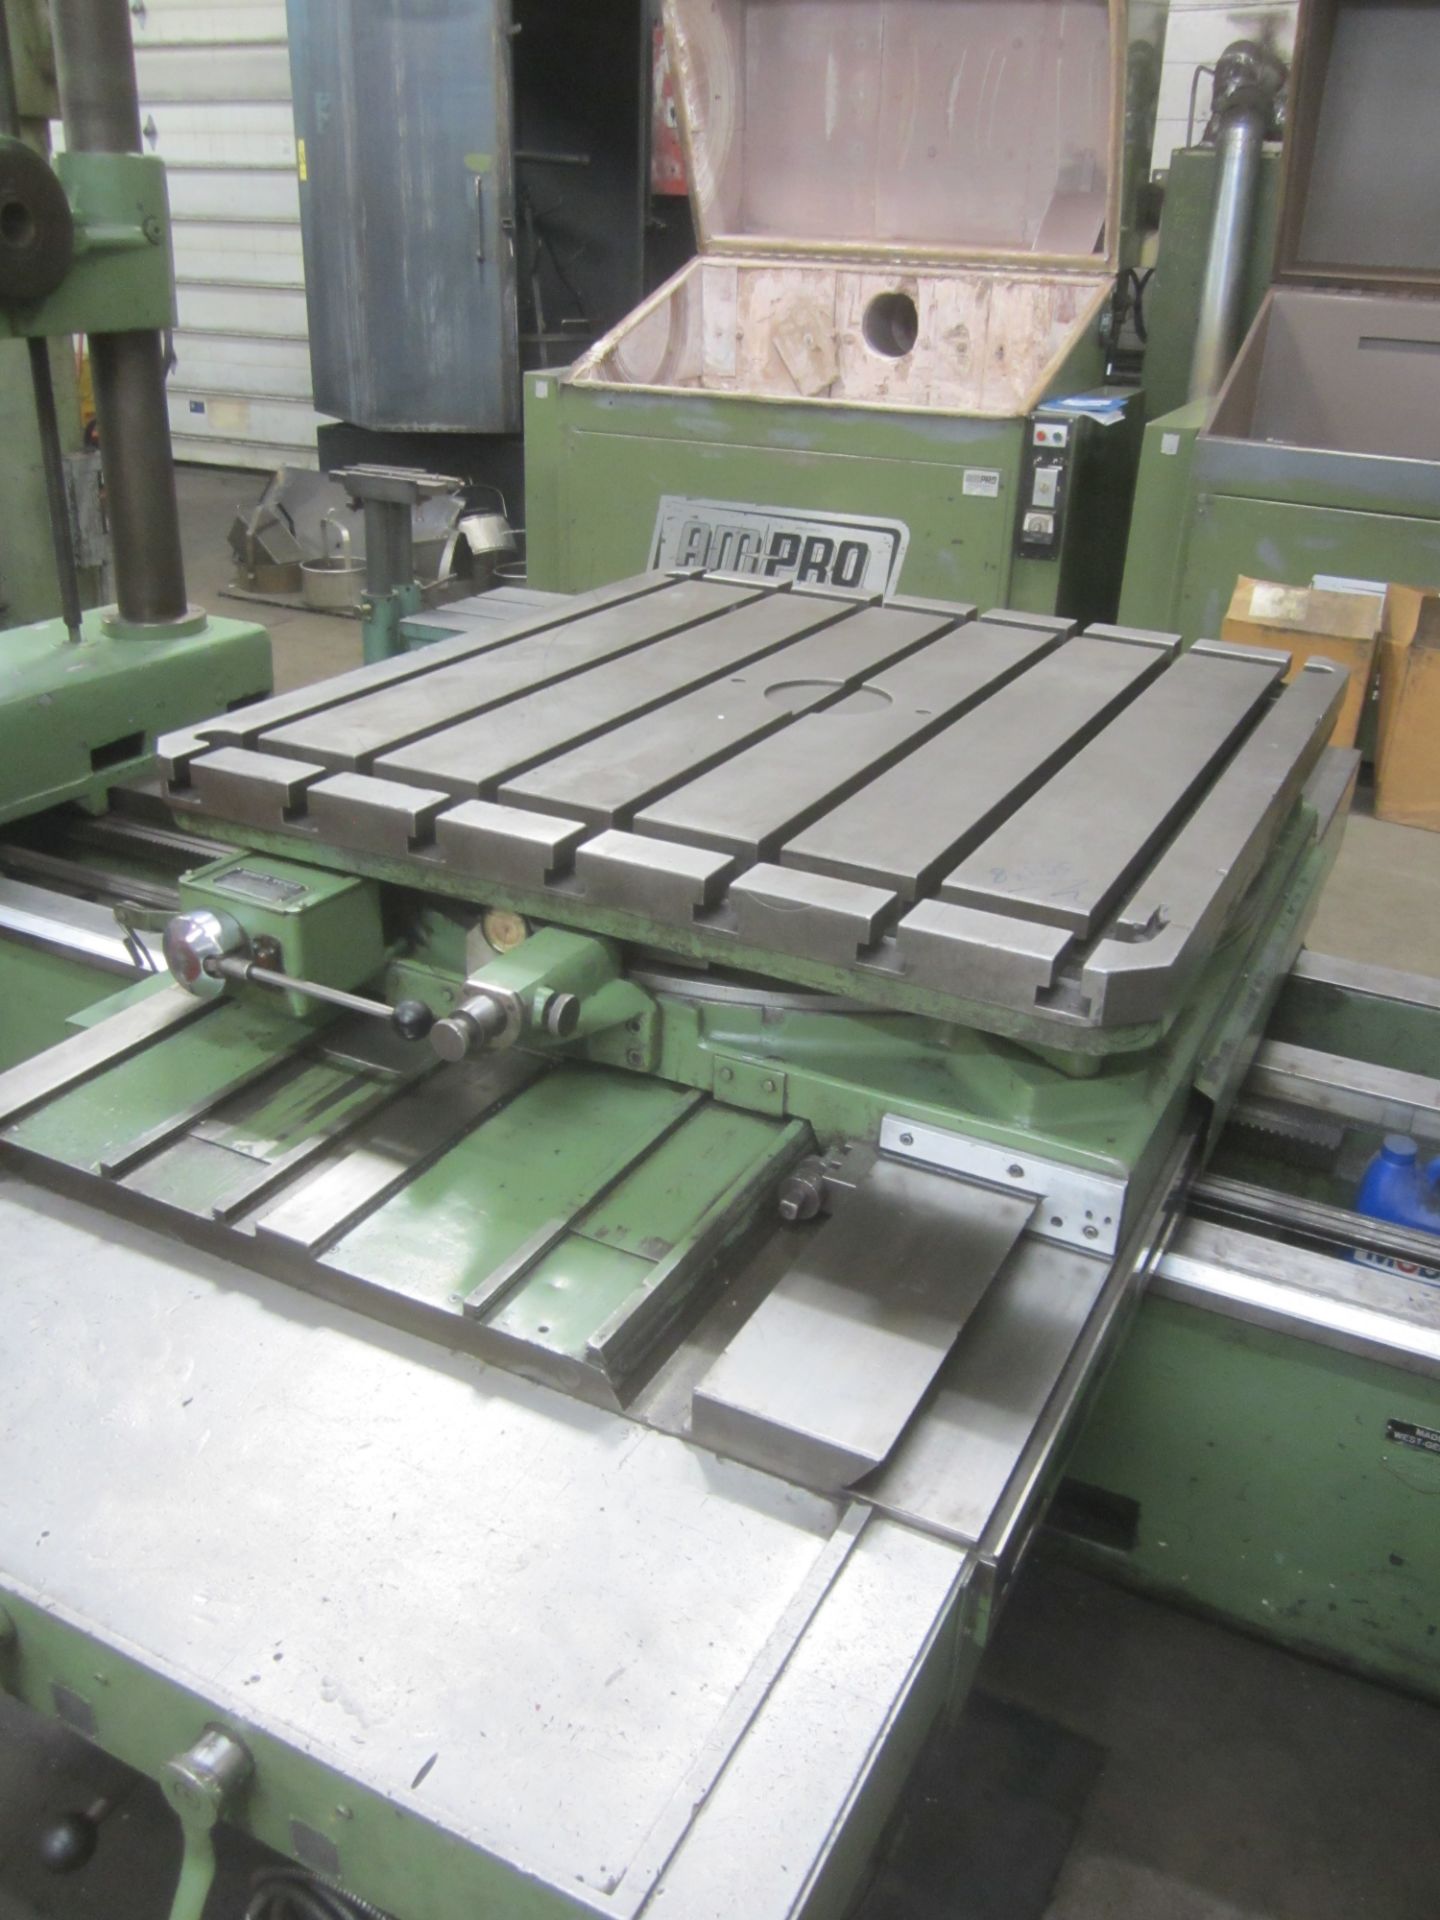 Scharmann 3" Horizontal Boring Mill, s/n 7146, 44" X 48" Power Rotary Table, Outboard Support, 51" - Image 3 of 9